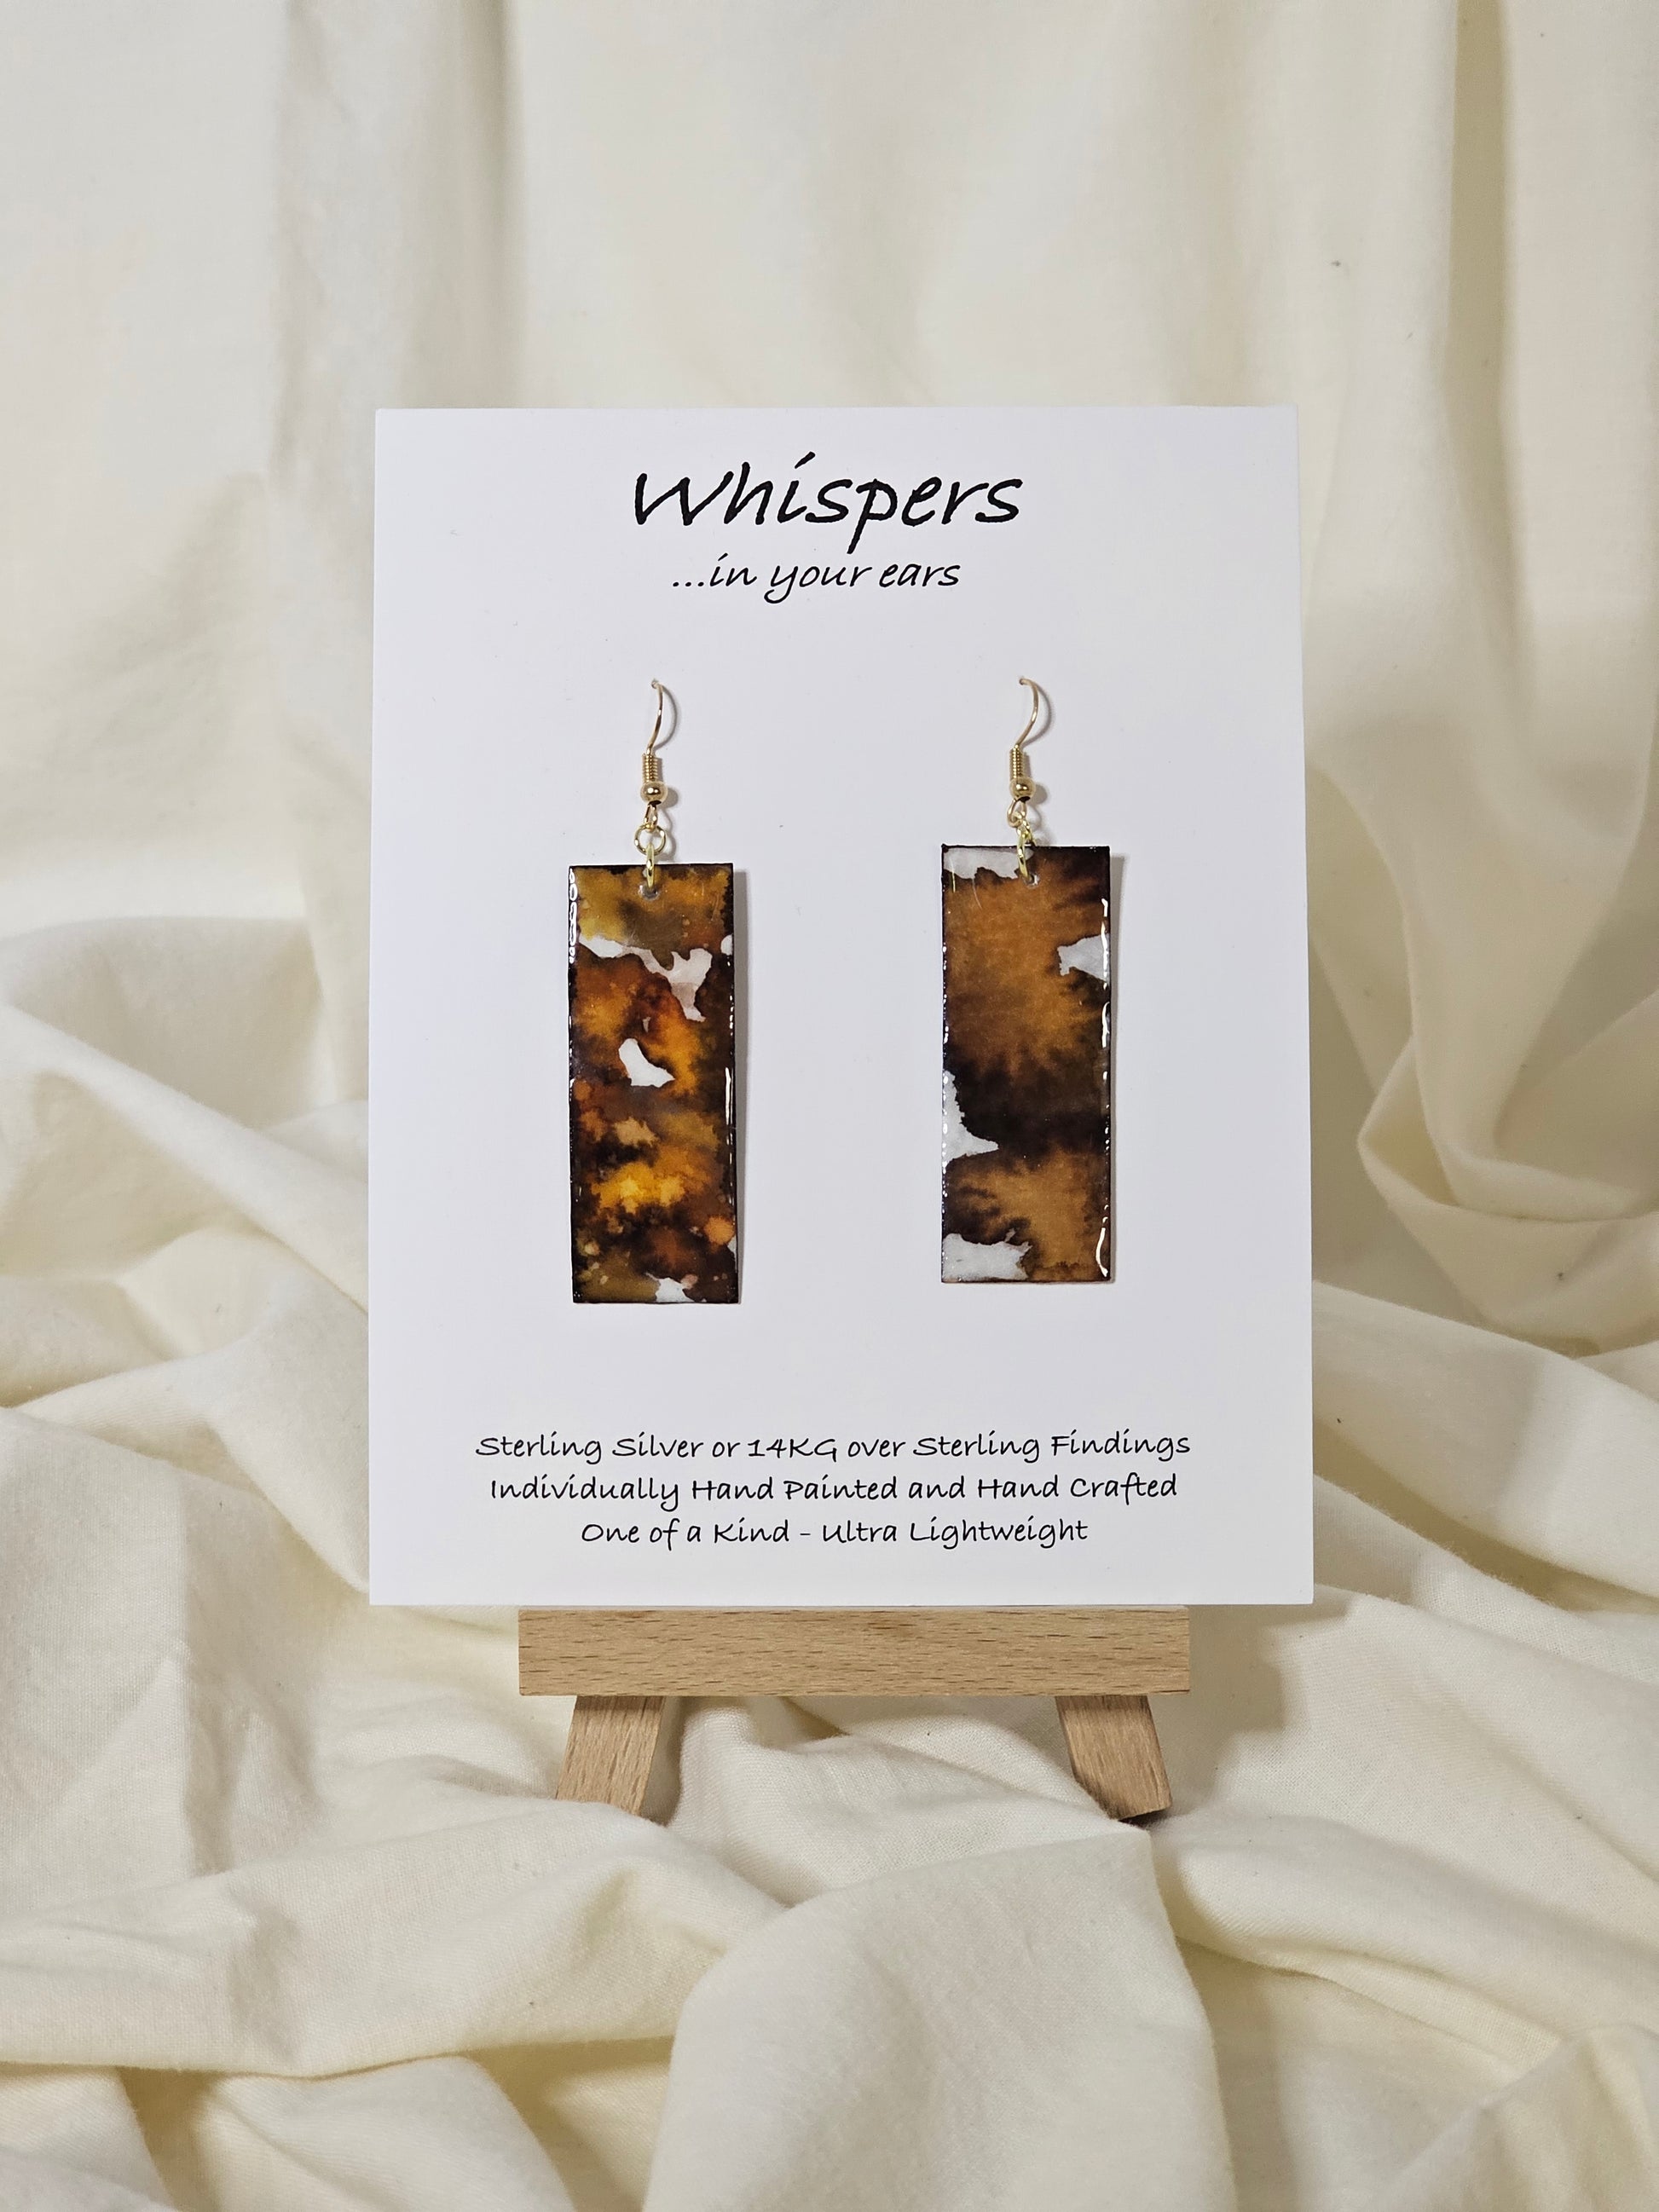 Hand painted watercolor ultra lightweight paper earrings. Muted brown, golden honey and espresso tones. Back is painted with similar design and color. Elongated rectangle in shape. 14kg over silver findings. Hangs 2 1/4" in Length